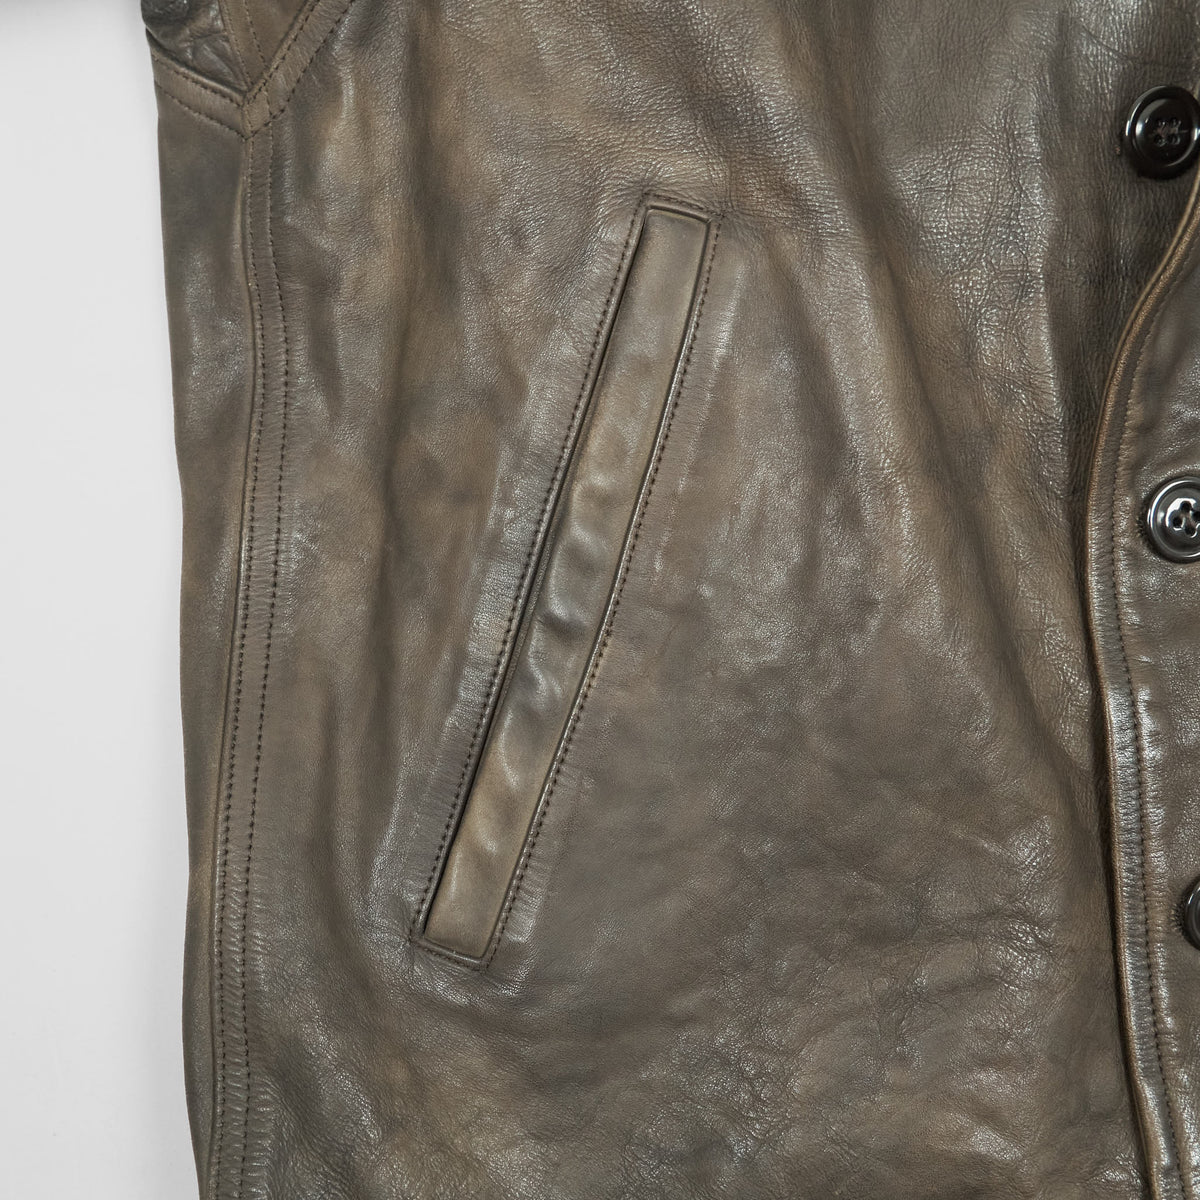 Double RL Limited Leather N-1 Deck Jacket